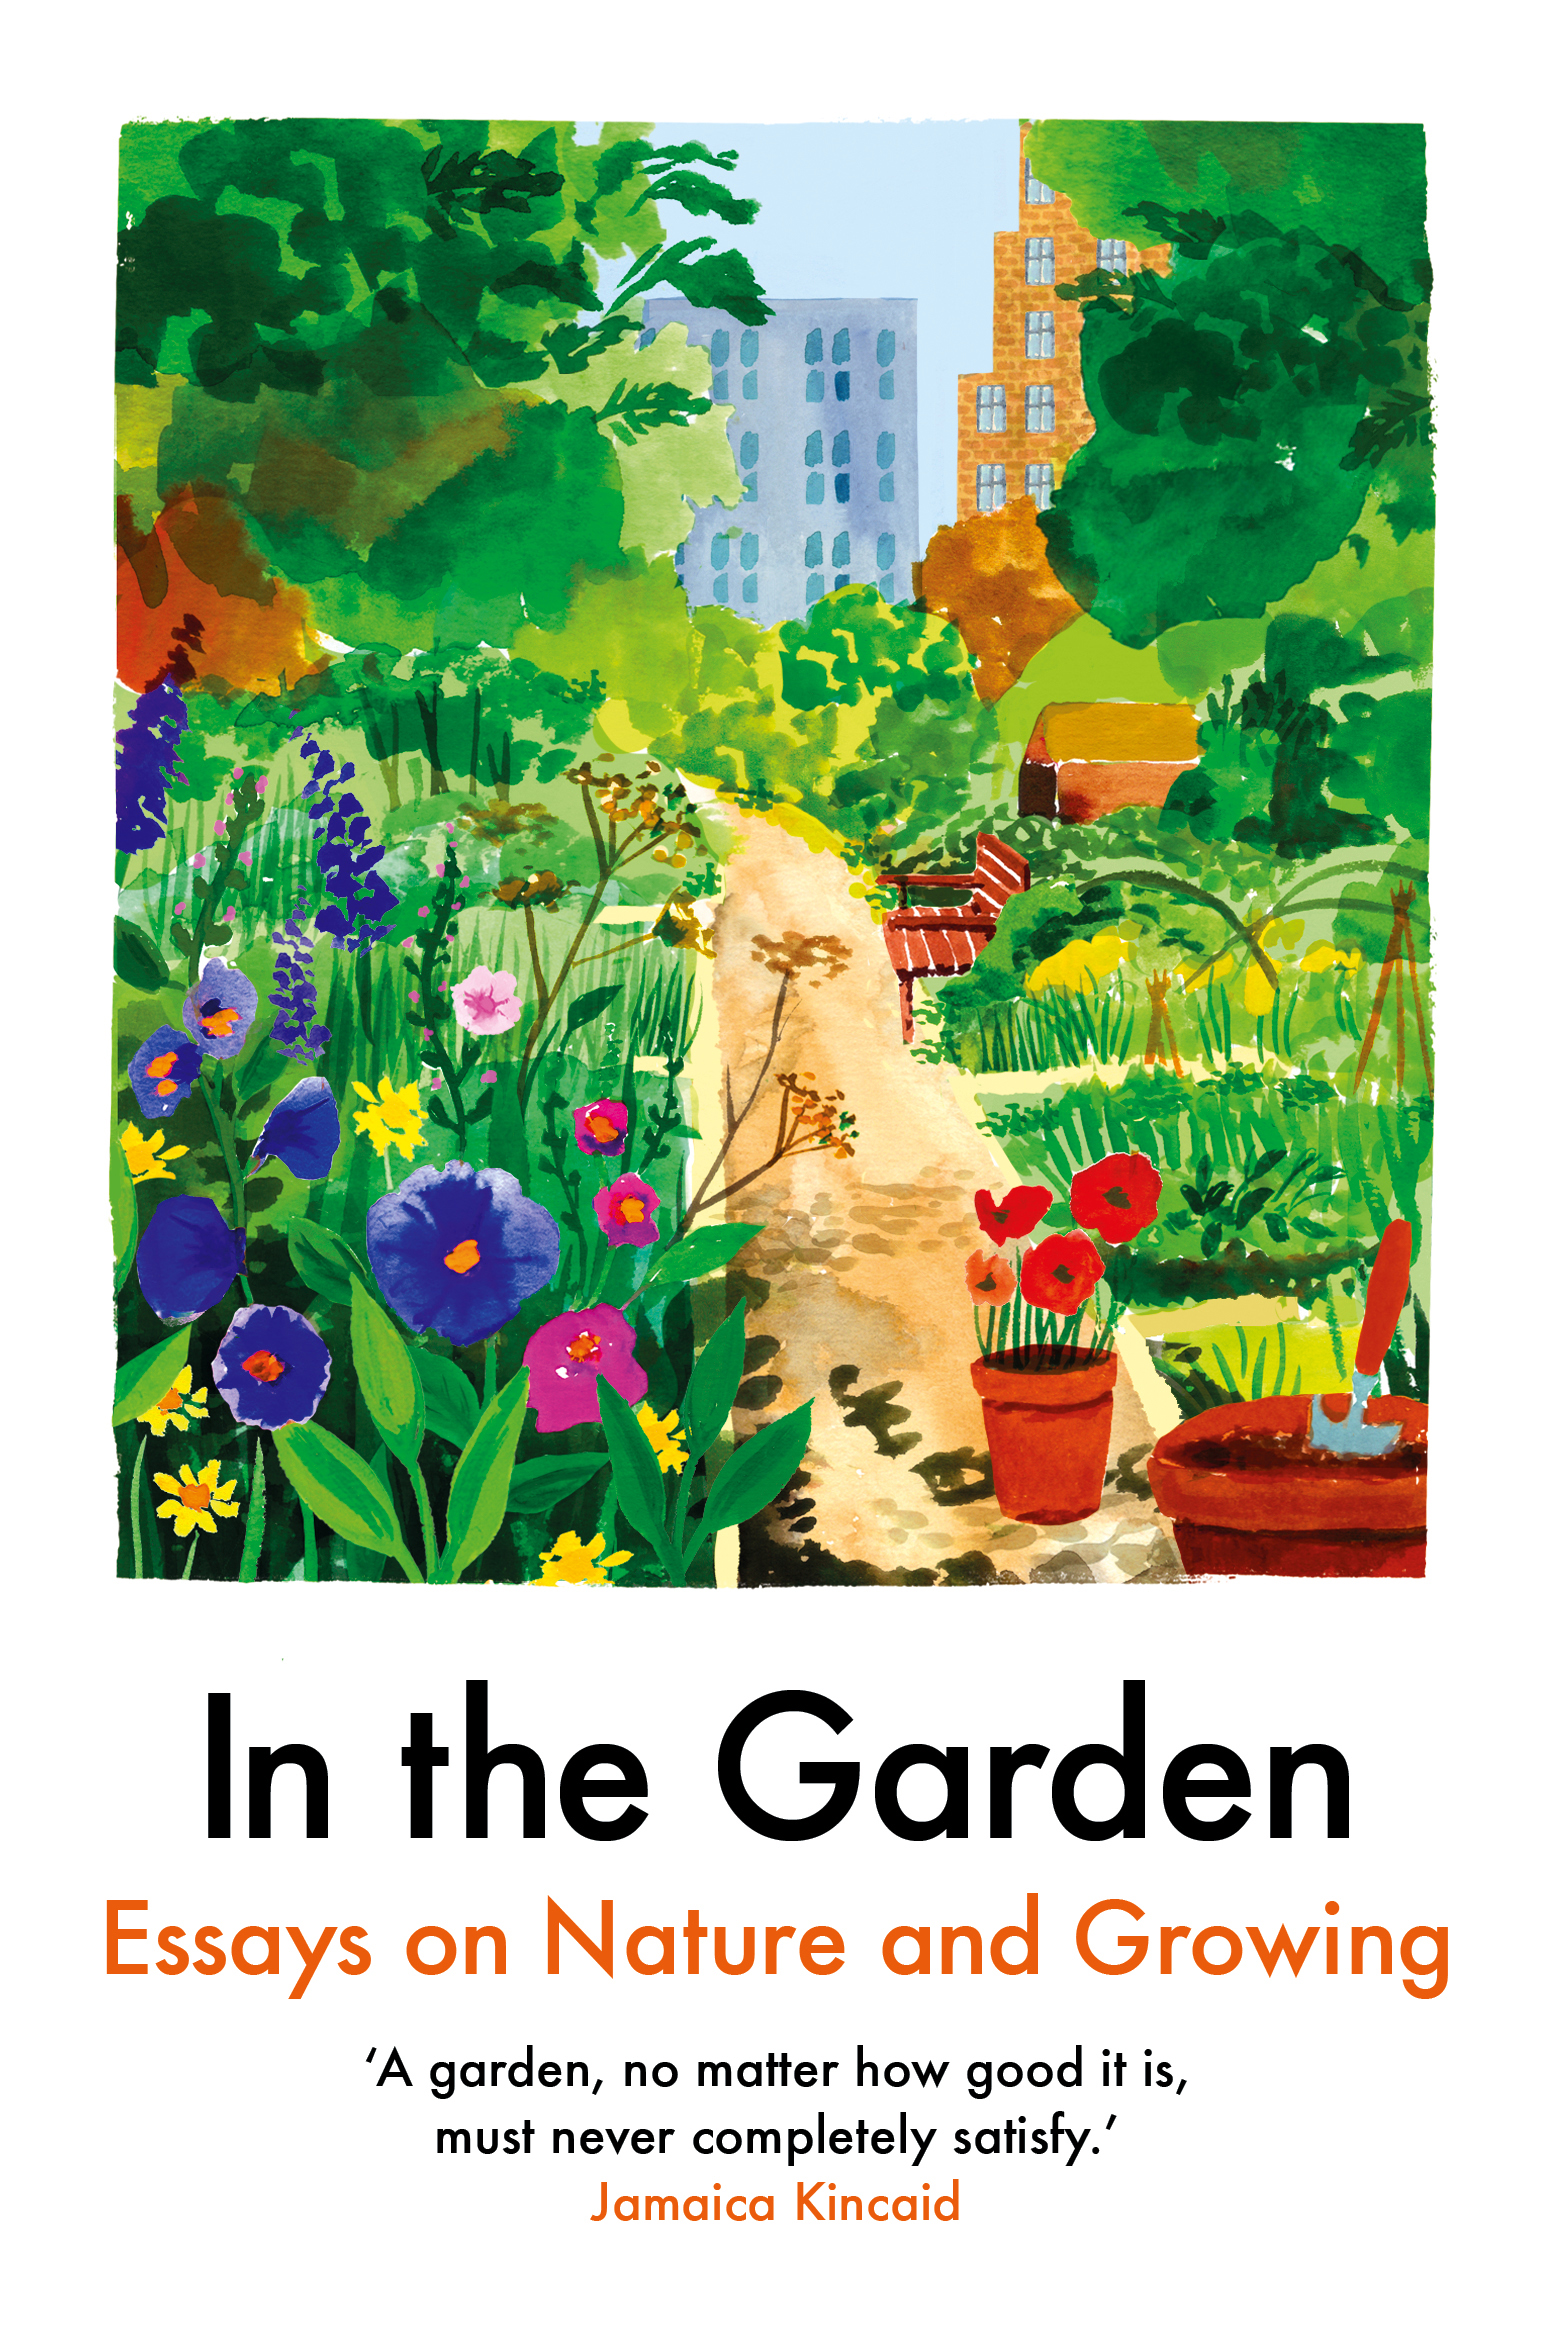 In the Garden: Essays on Nature and Growing